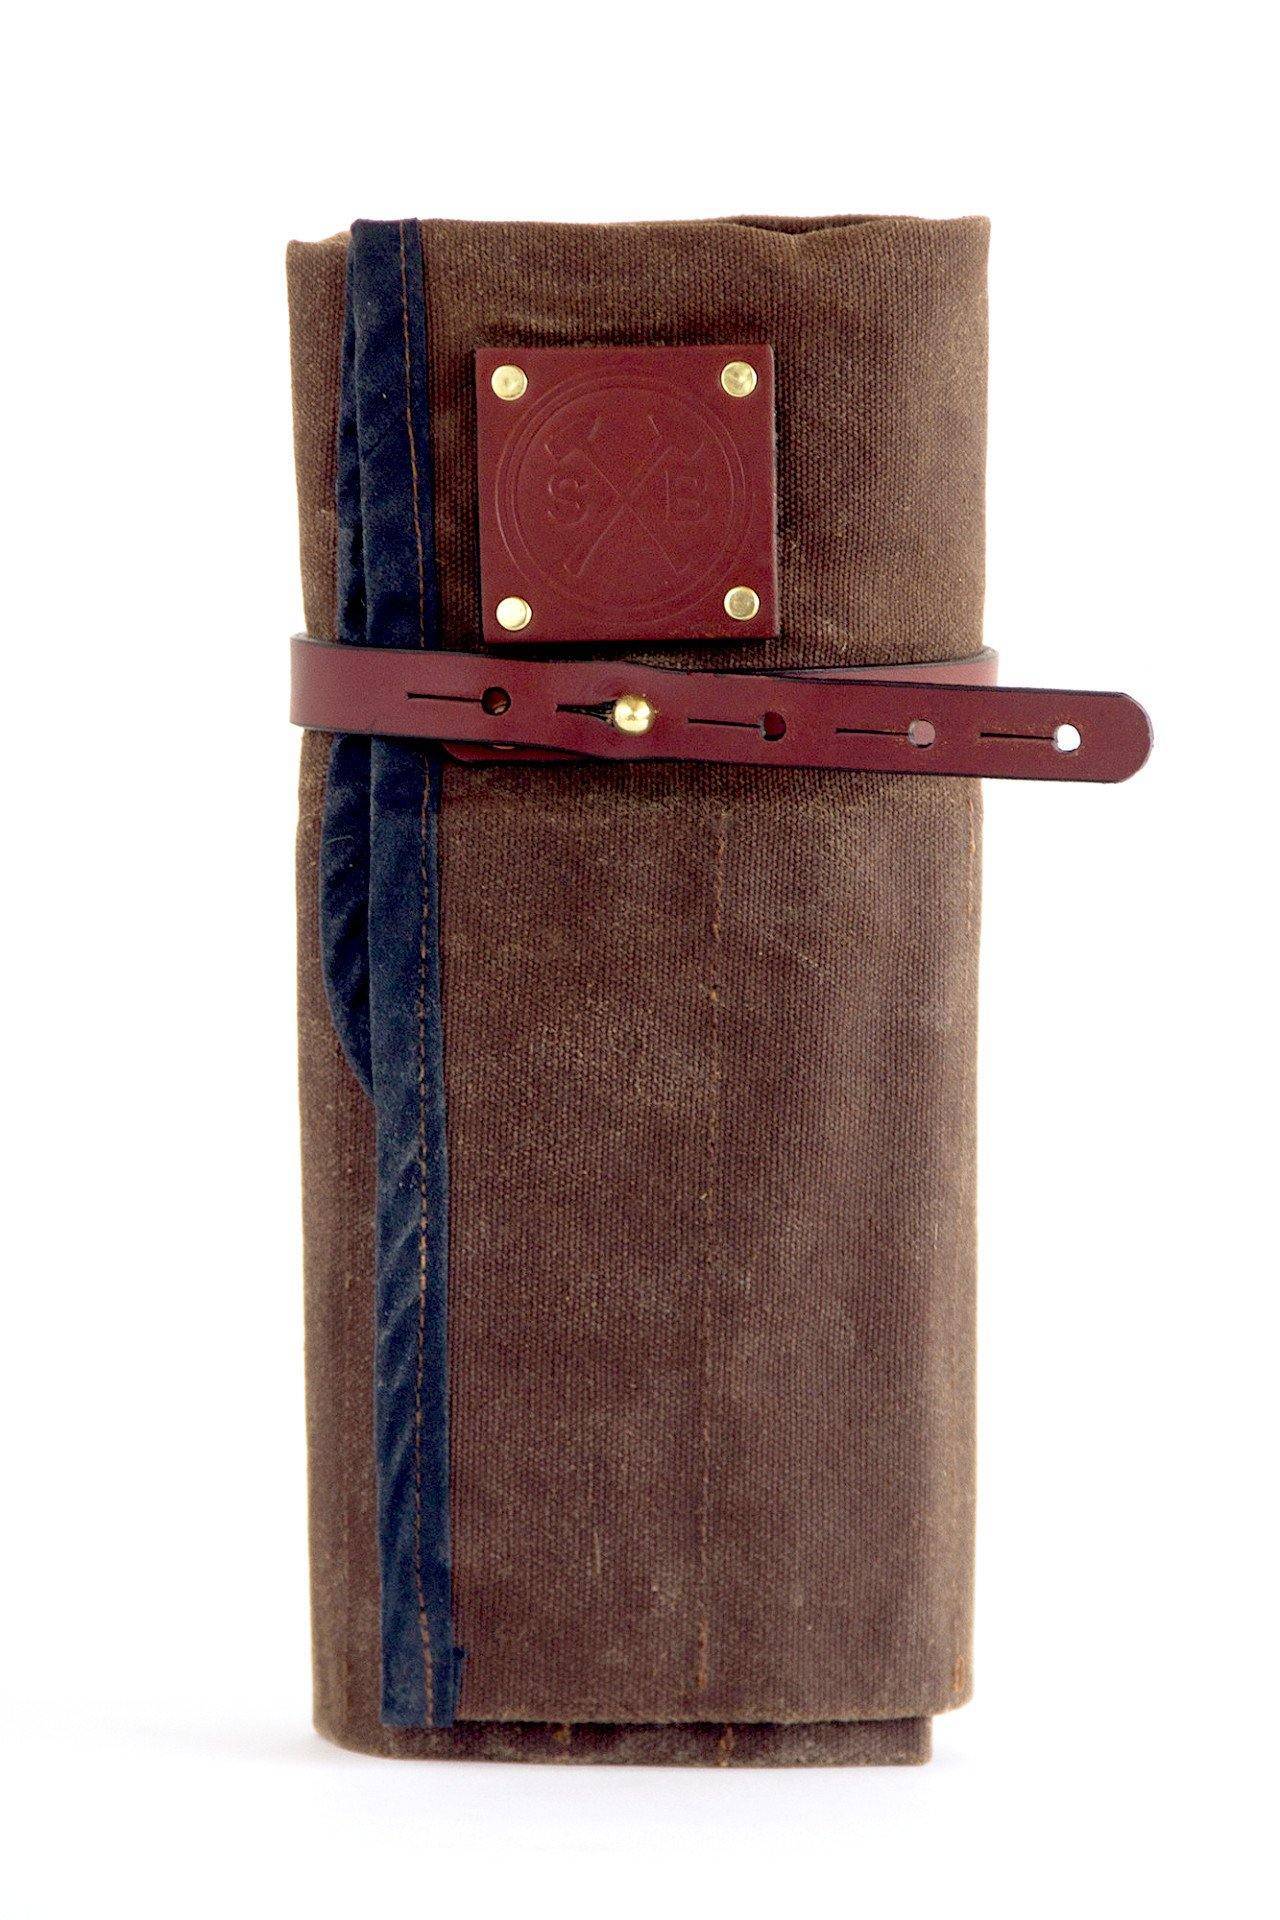 Sturdy Brothers | The Orville Waxed Canvas Tool Roll